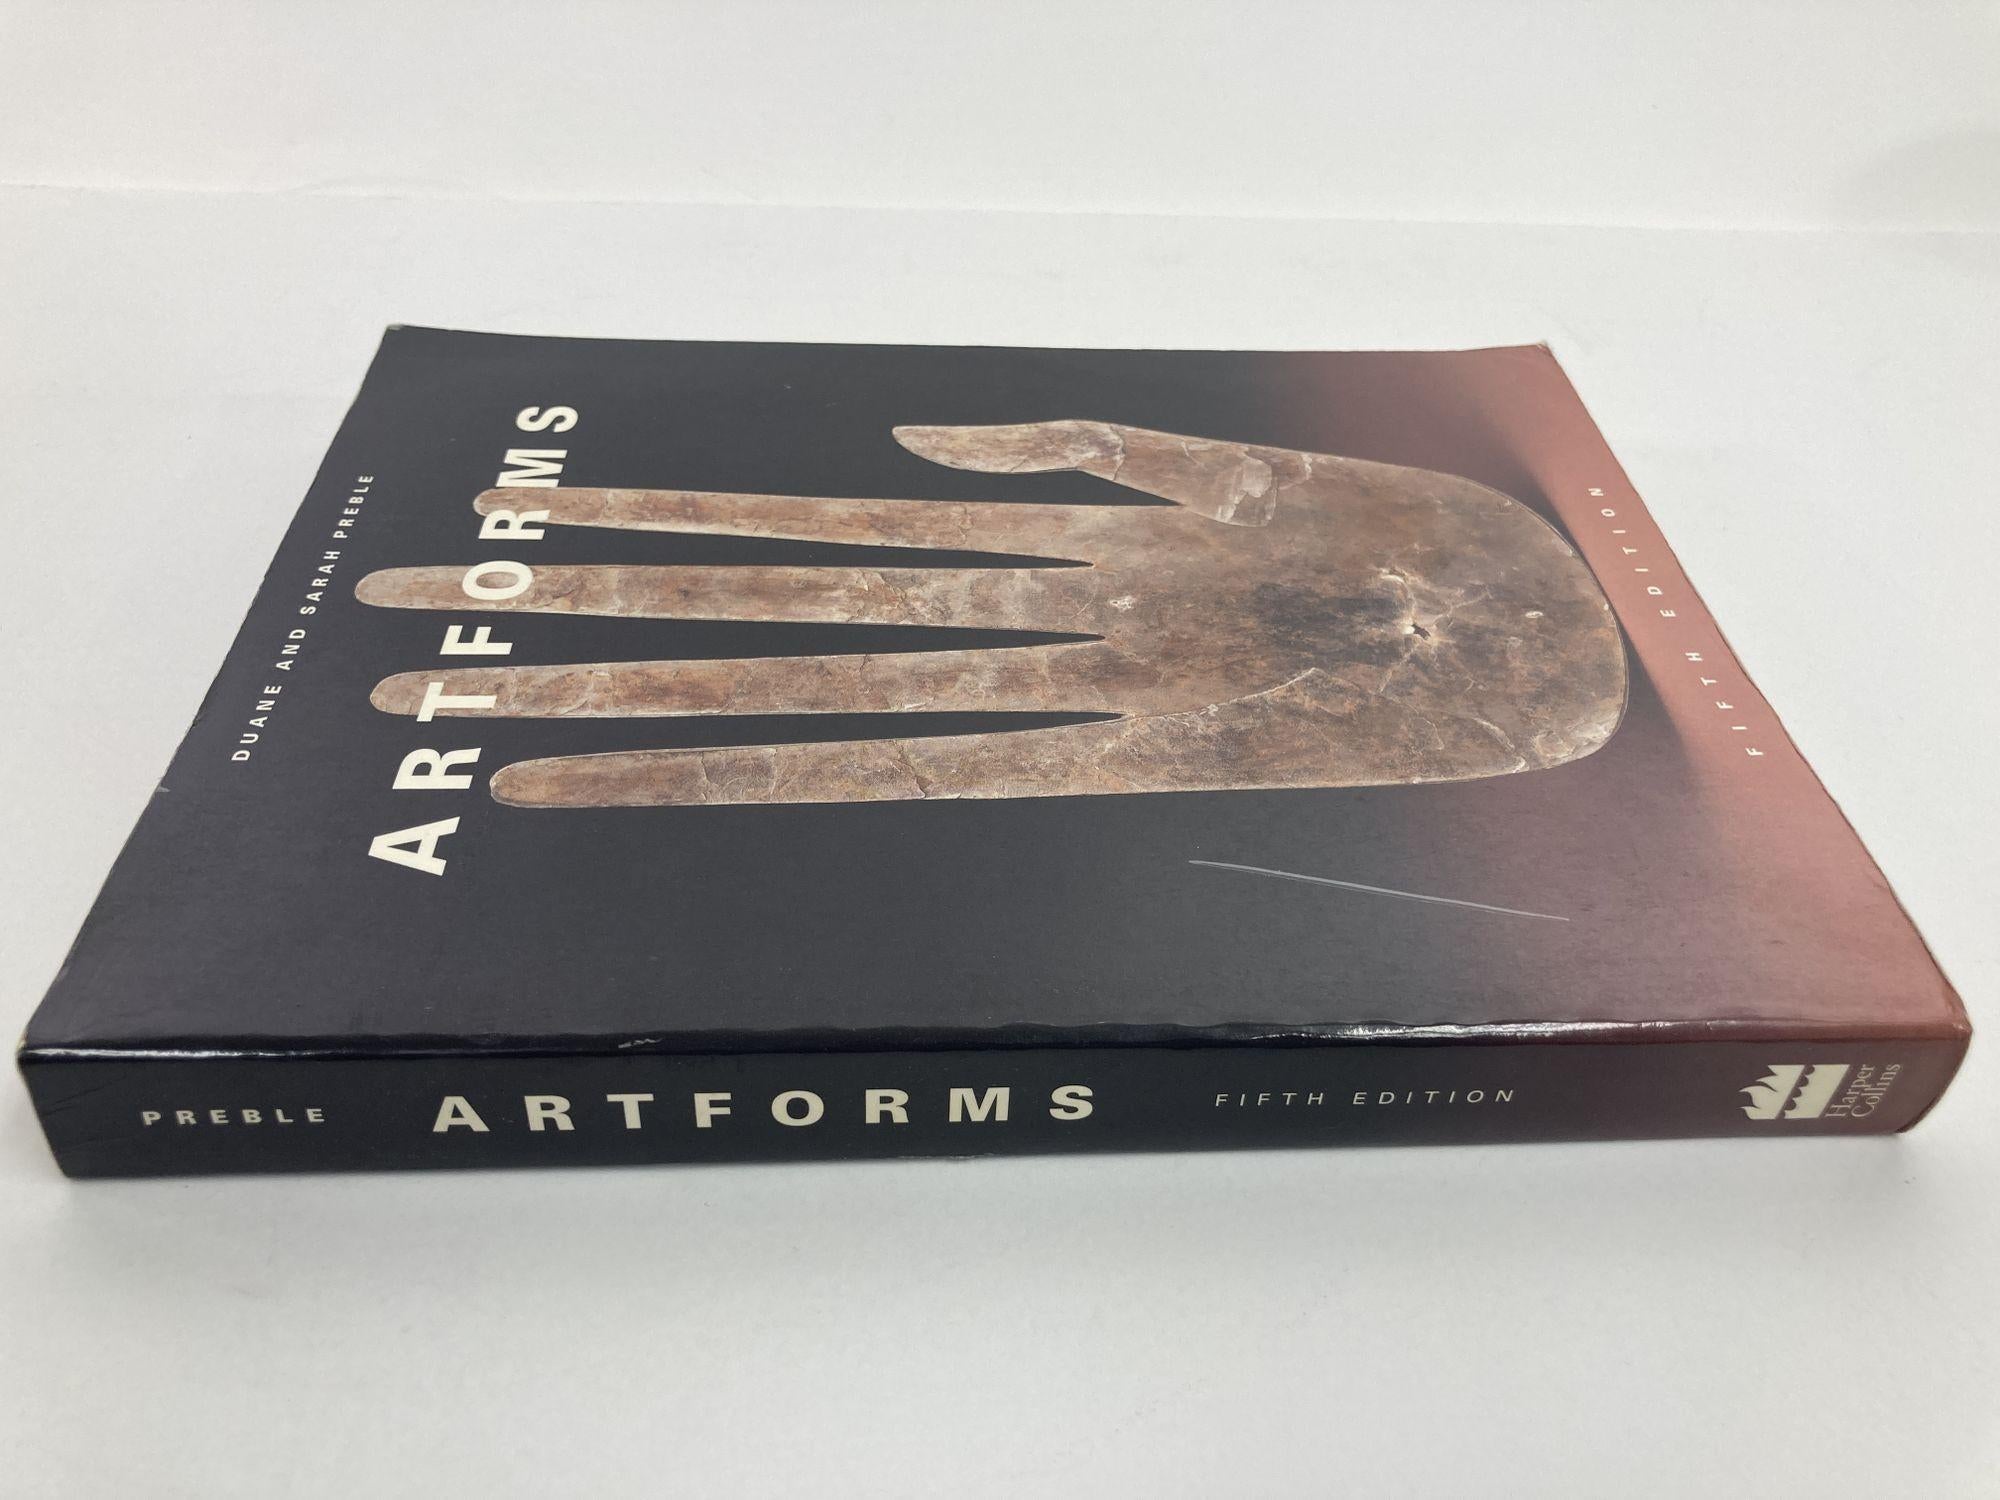 Artforms: An Introduction to the Visual Arts Duane and Sarah Preble Softcover Book.
5th Edition 1994.
Publisher: Harpercollins College Div, 1994.
For Art Appreciation, Art for Non-Majors, and Introduction to Art.Introducing students to the